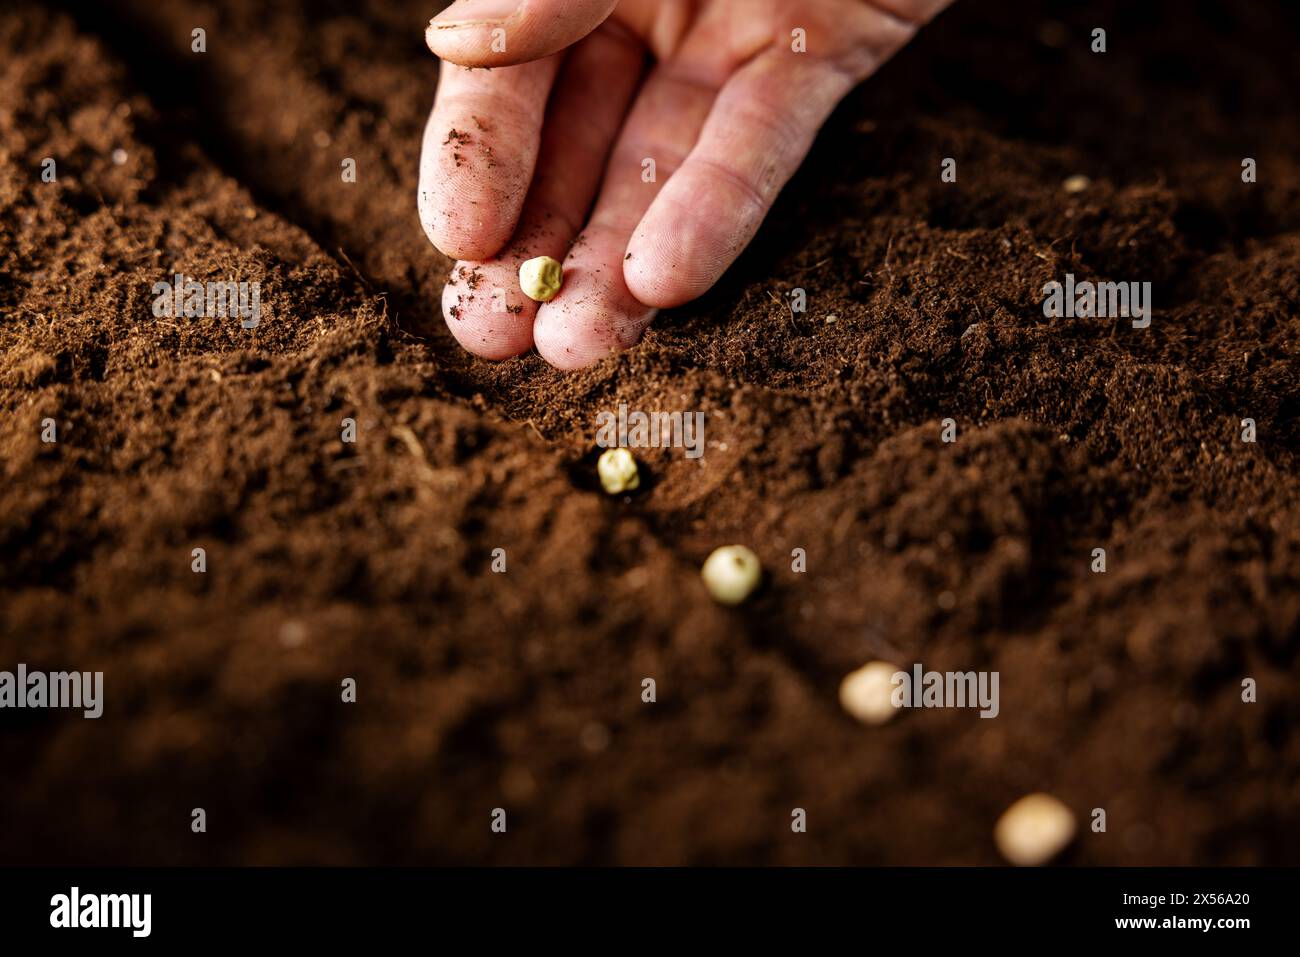 hand planting pea seeds in soil. vegetable garden, agriculture Stock Photo